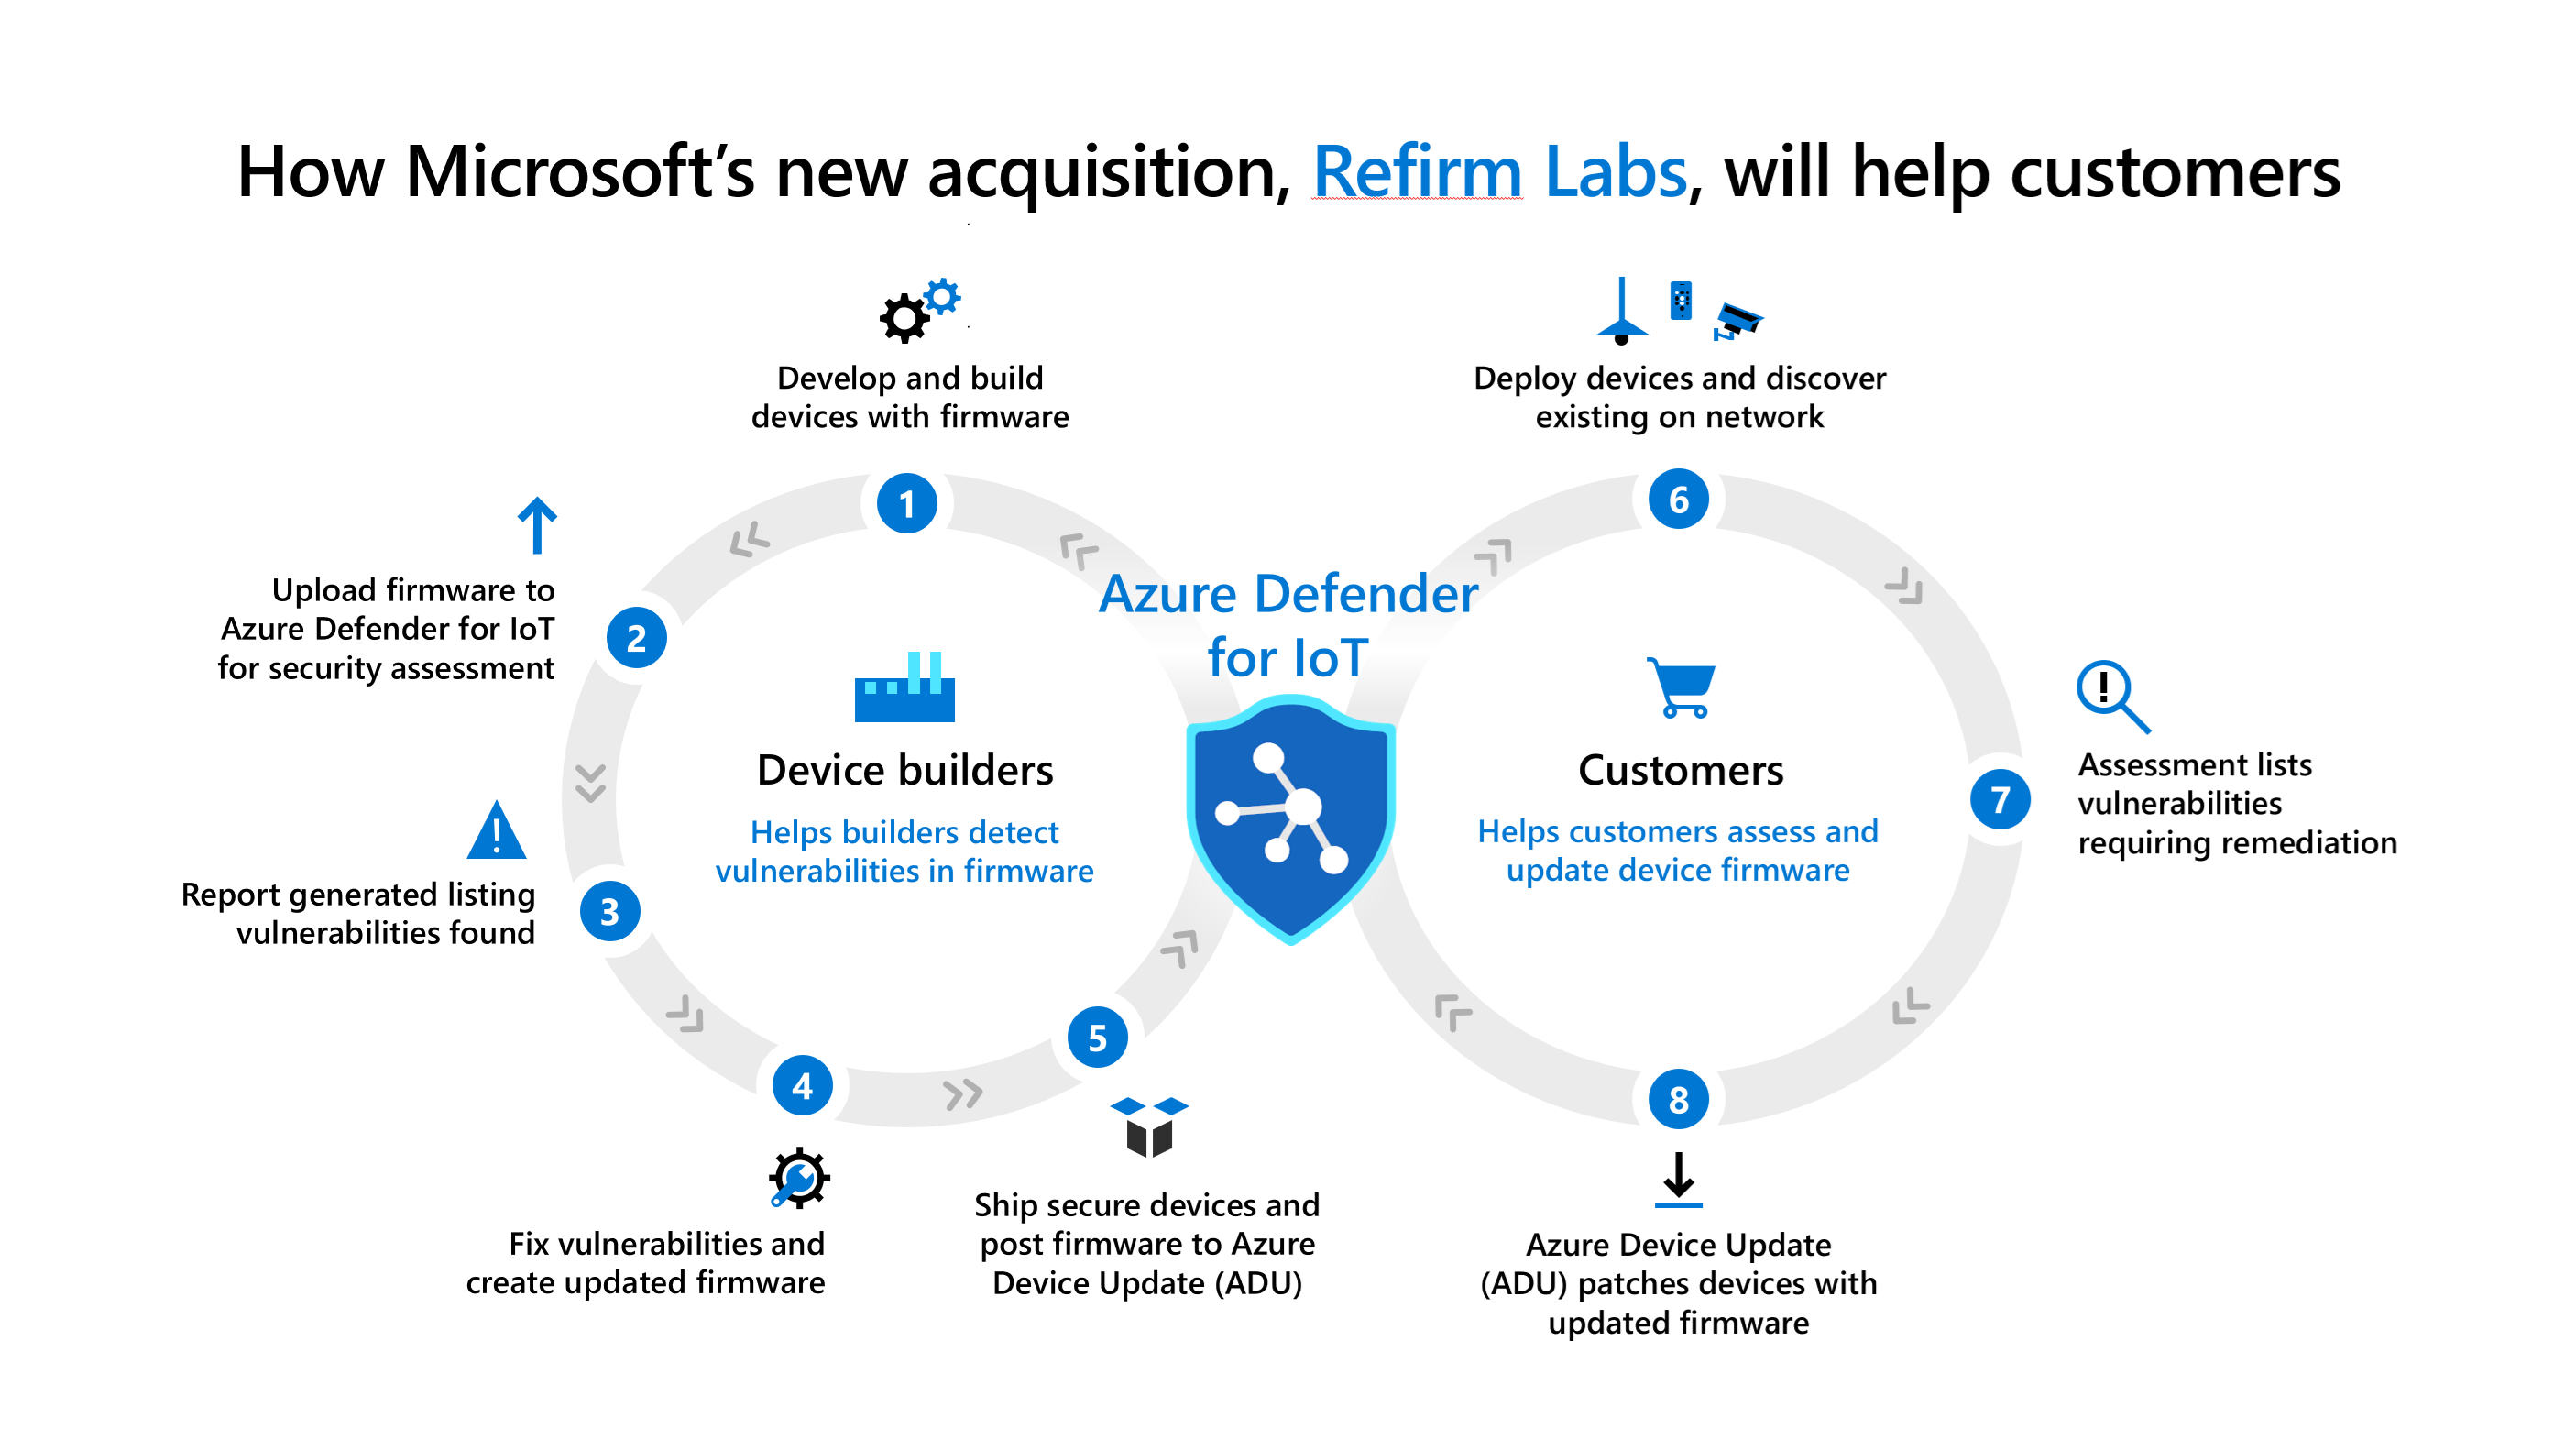 How Microsoft's new acquisition, ReFirm Labs, will help customers.